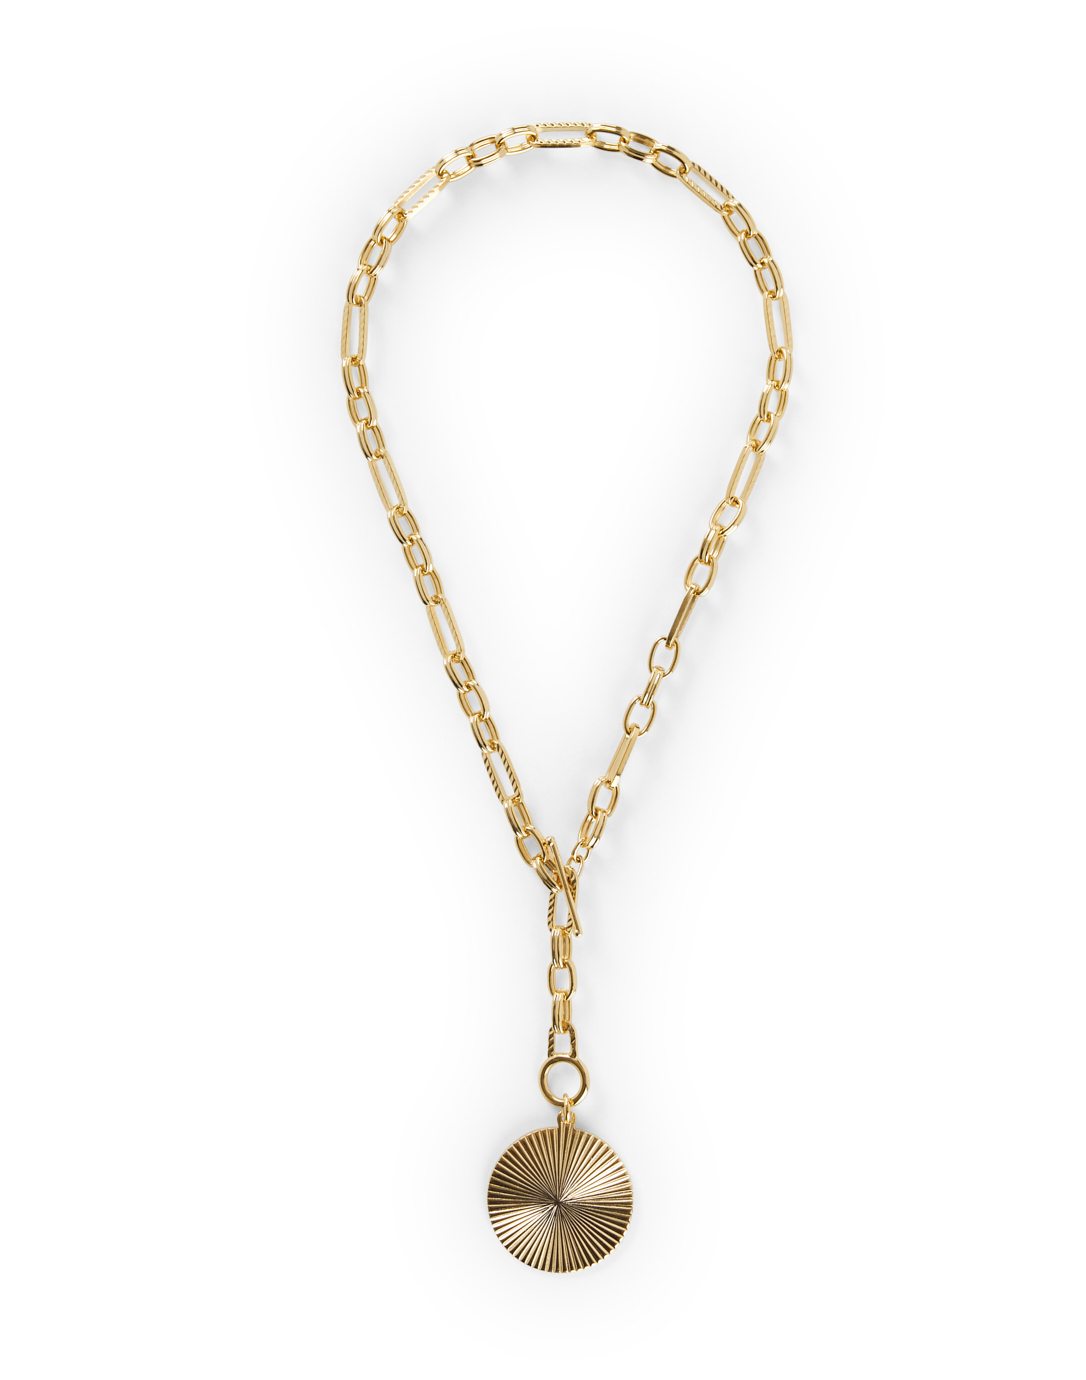 Matte Gold Chain Necklace With Front Toggle Clasp Closure and